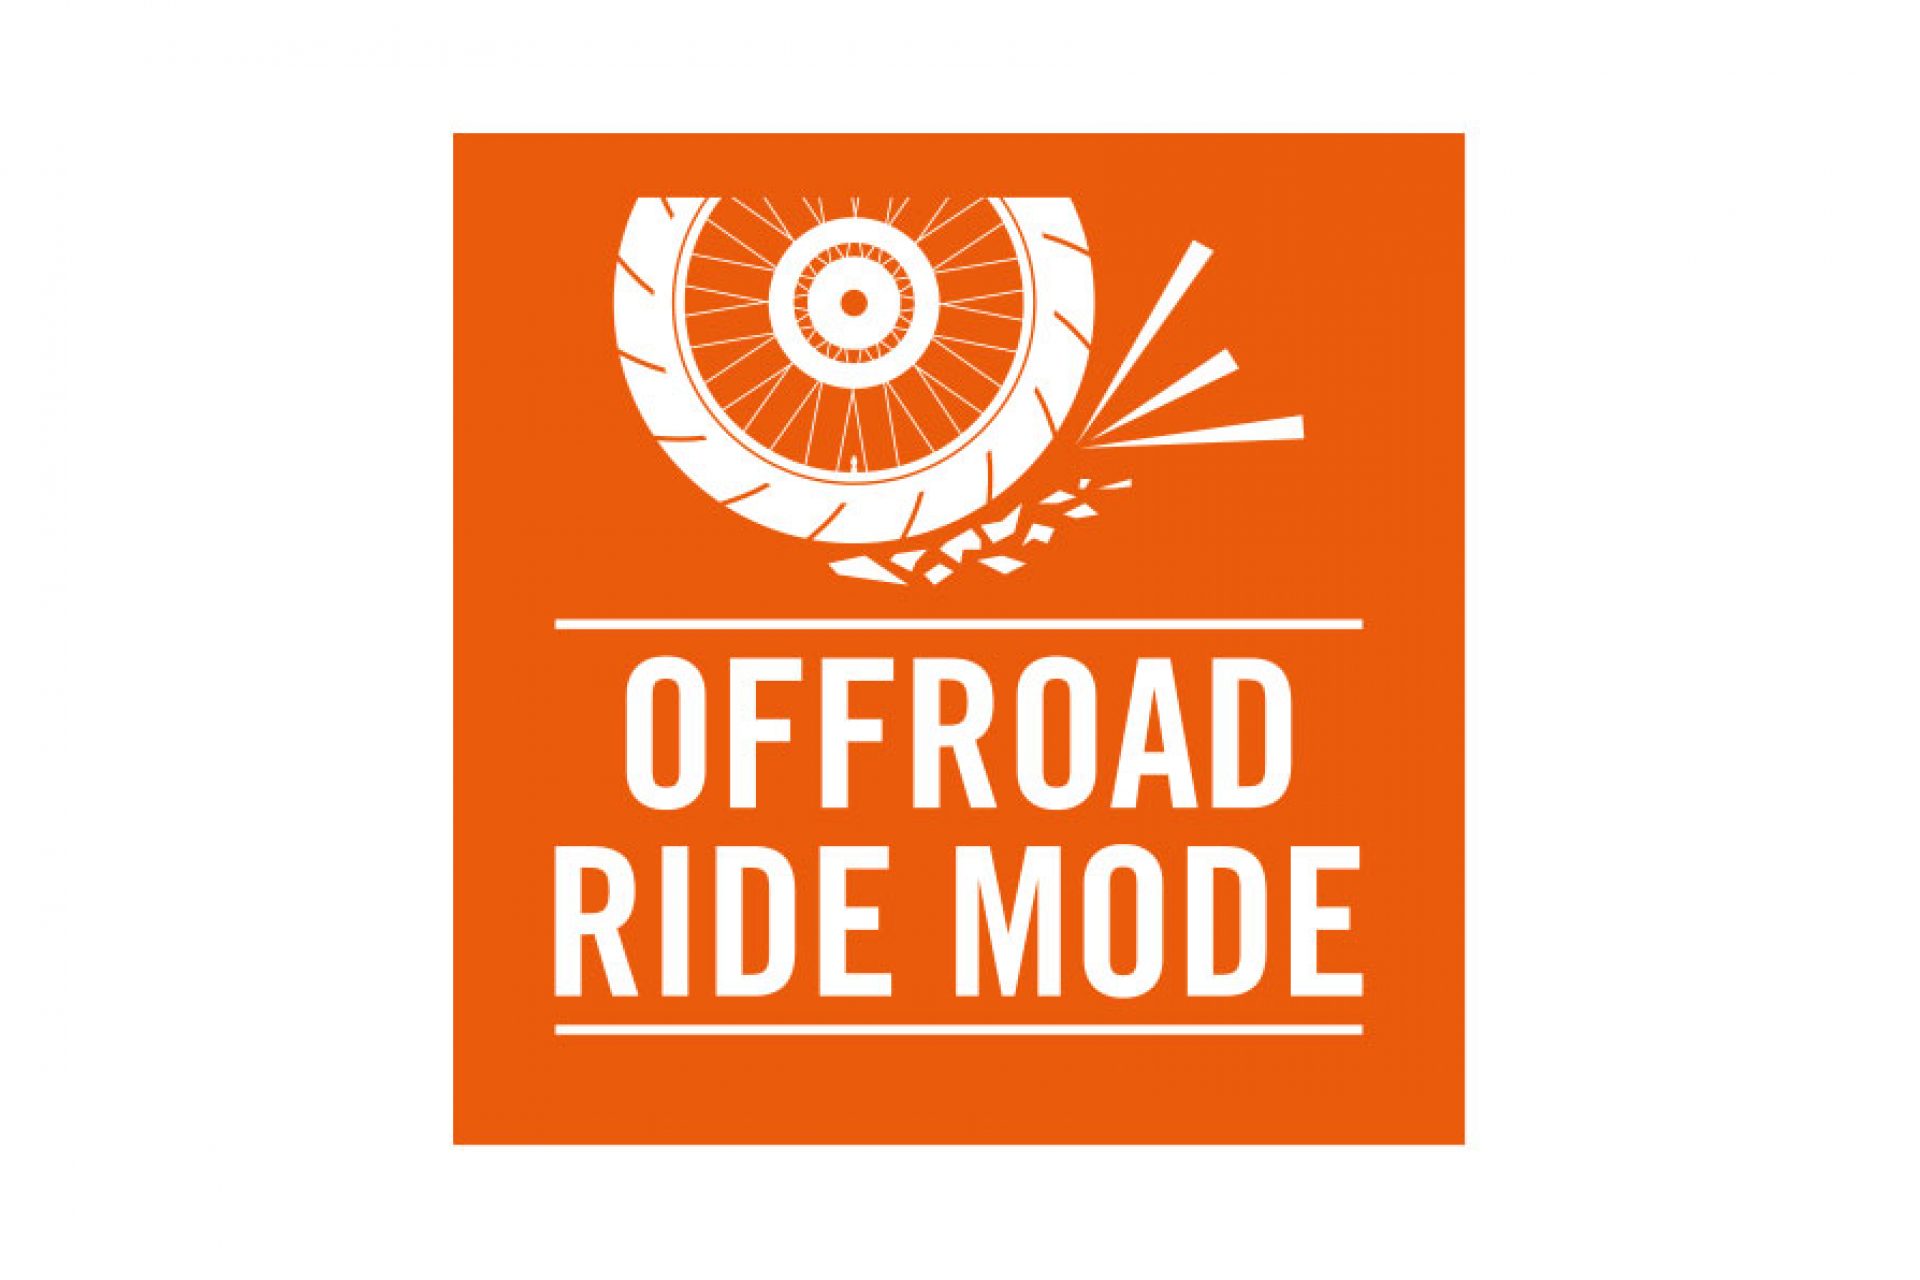 OFFROAD RIDE MODE